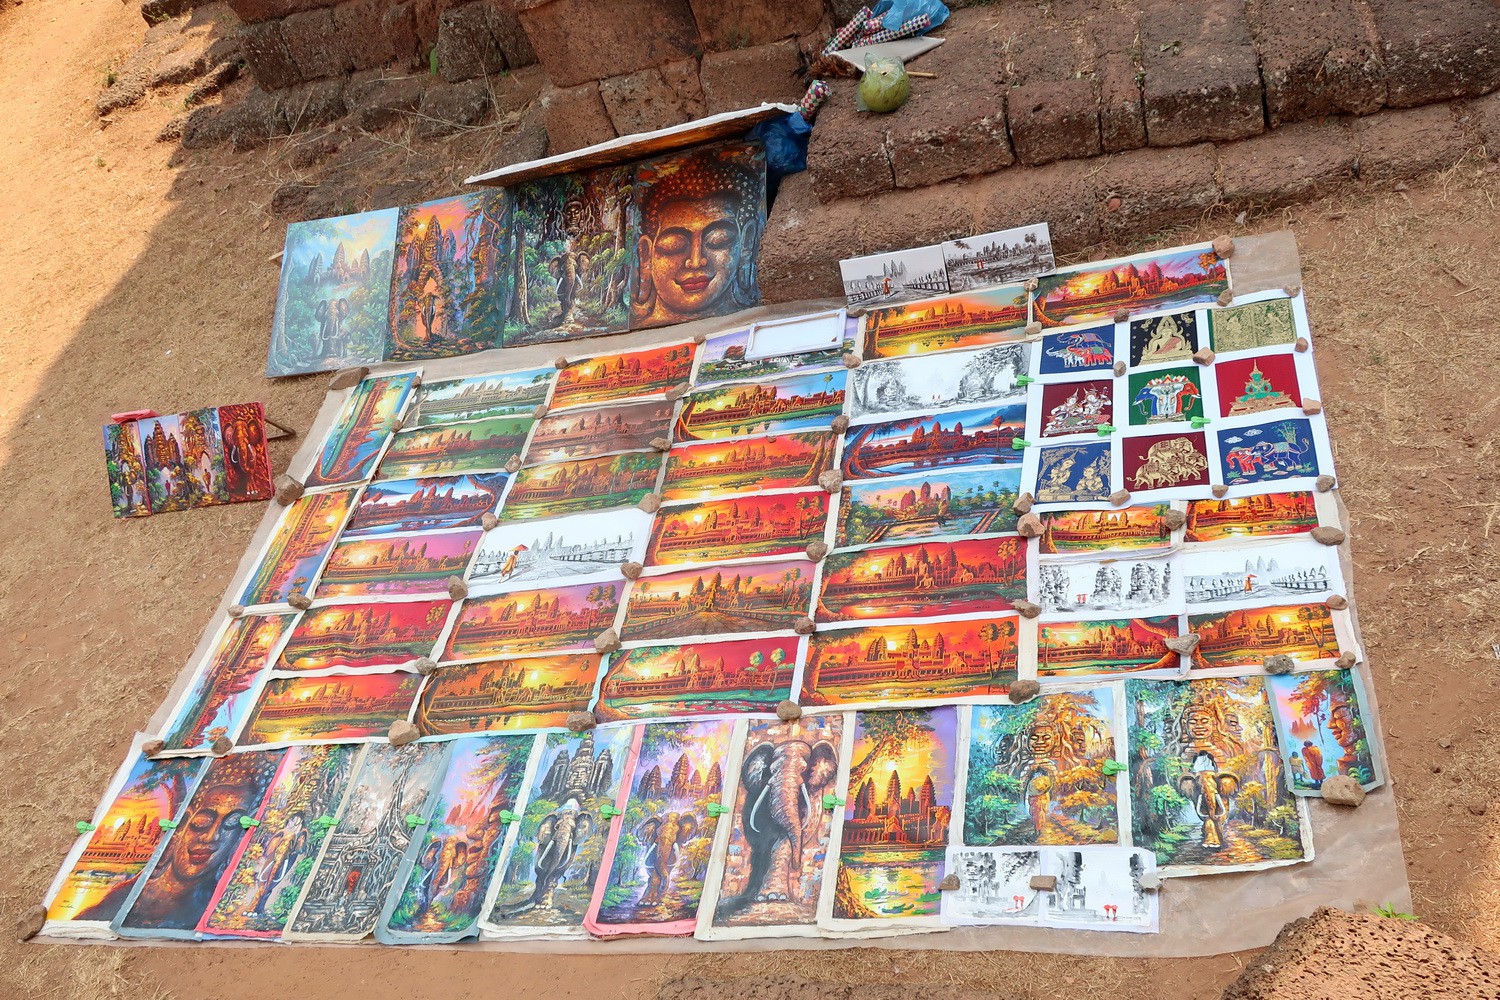 Shop with paintings in the Angkor Wat complex